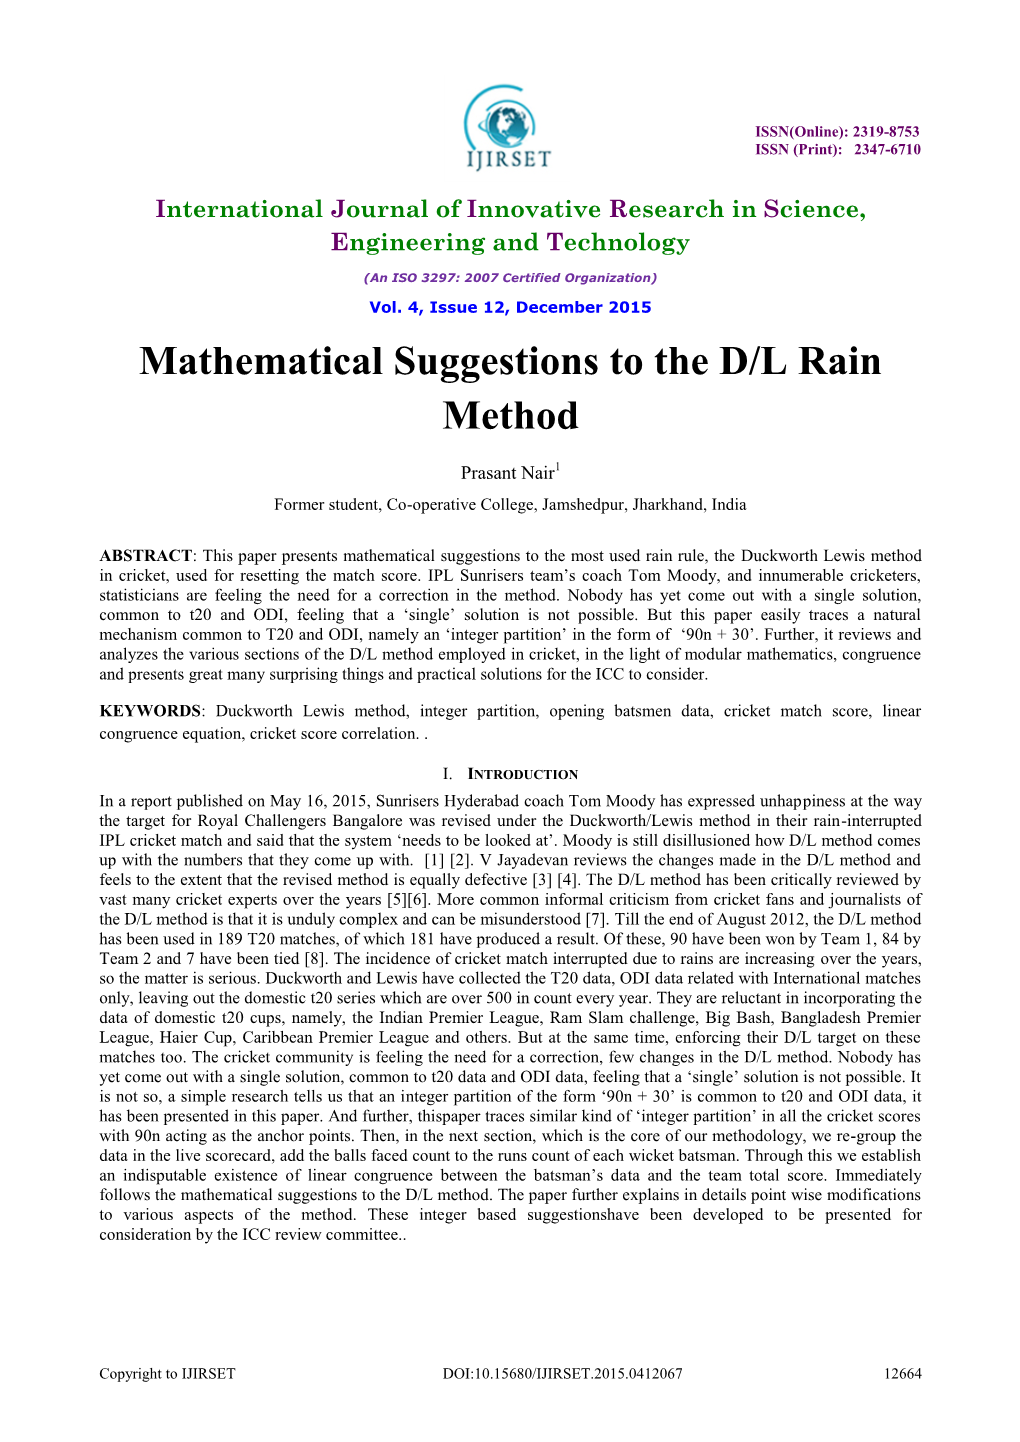 Mathematical Suggestions to the D/L Rain Method